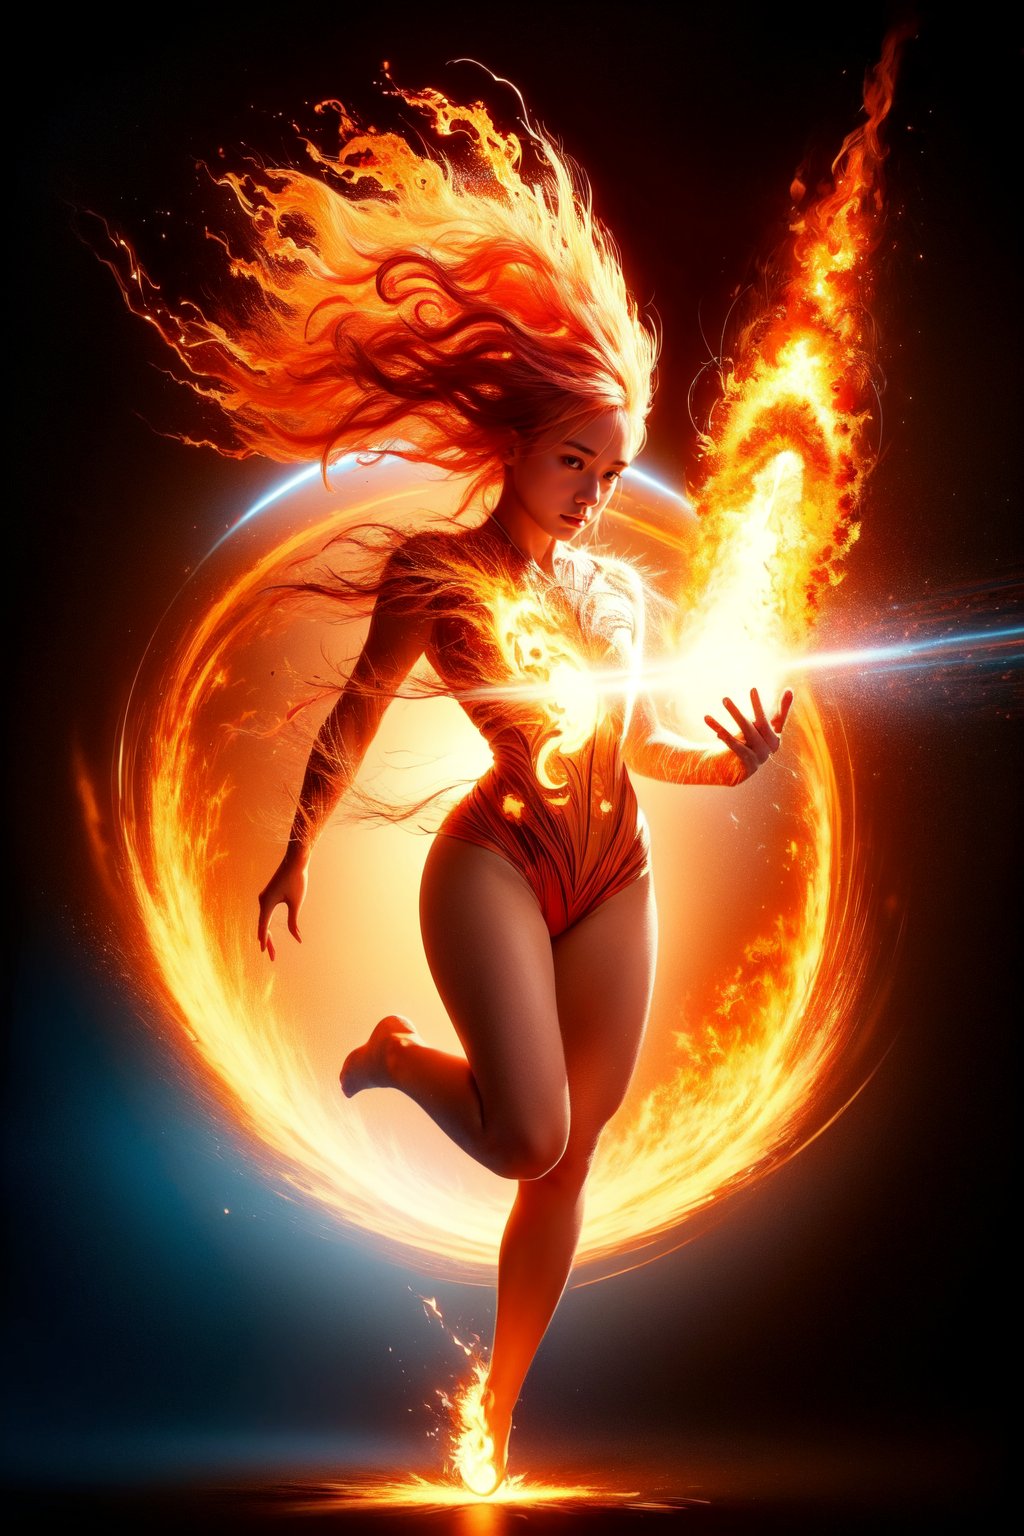 ((Masterpiece, best quality)),(Negative space:1.4),(1 girl, alone:1.4),Beautiful and delicate eyes, flowing pink hair, red hat, fireball, cast fire spell, Orange and red fractal background, looking sideways, blue-green eyes, full body, jumping